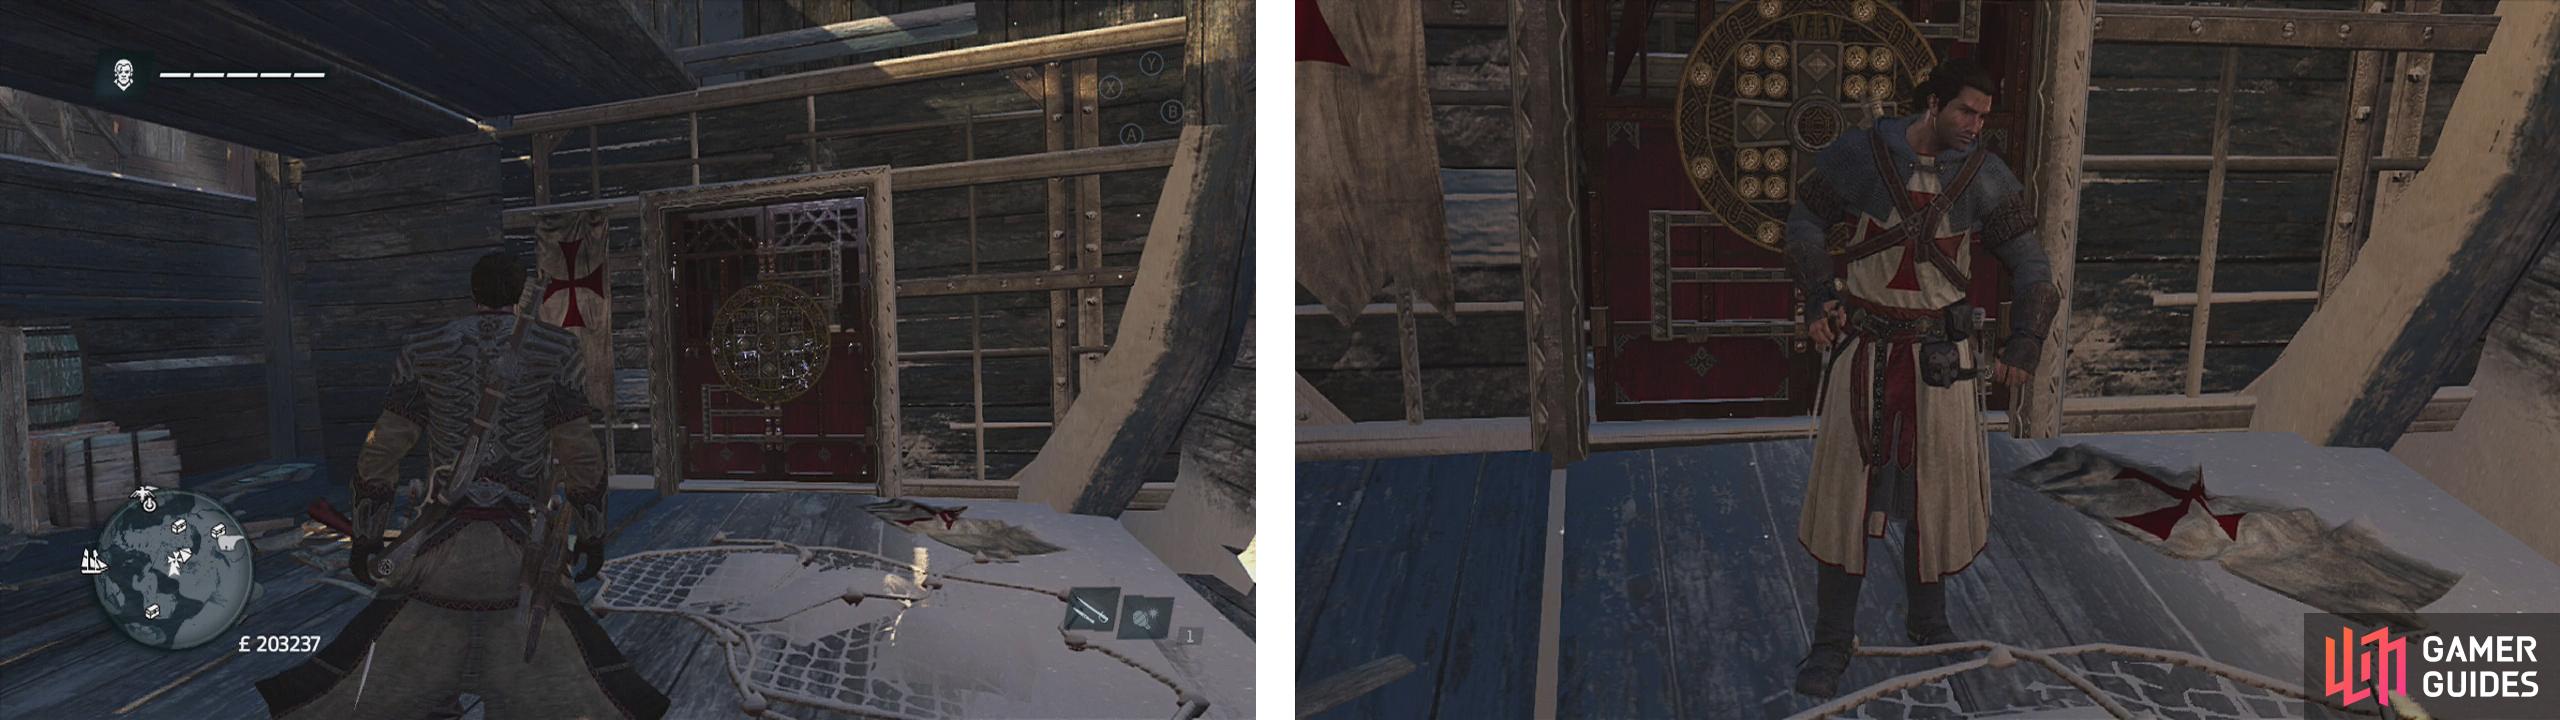 Once you have all of the relics, visit The Templar door at The Sapphire (left) for the Templar armour set (right).